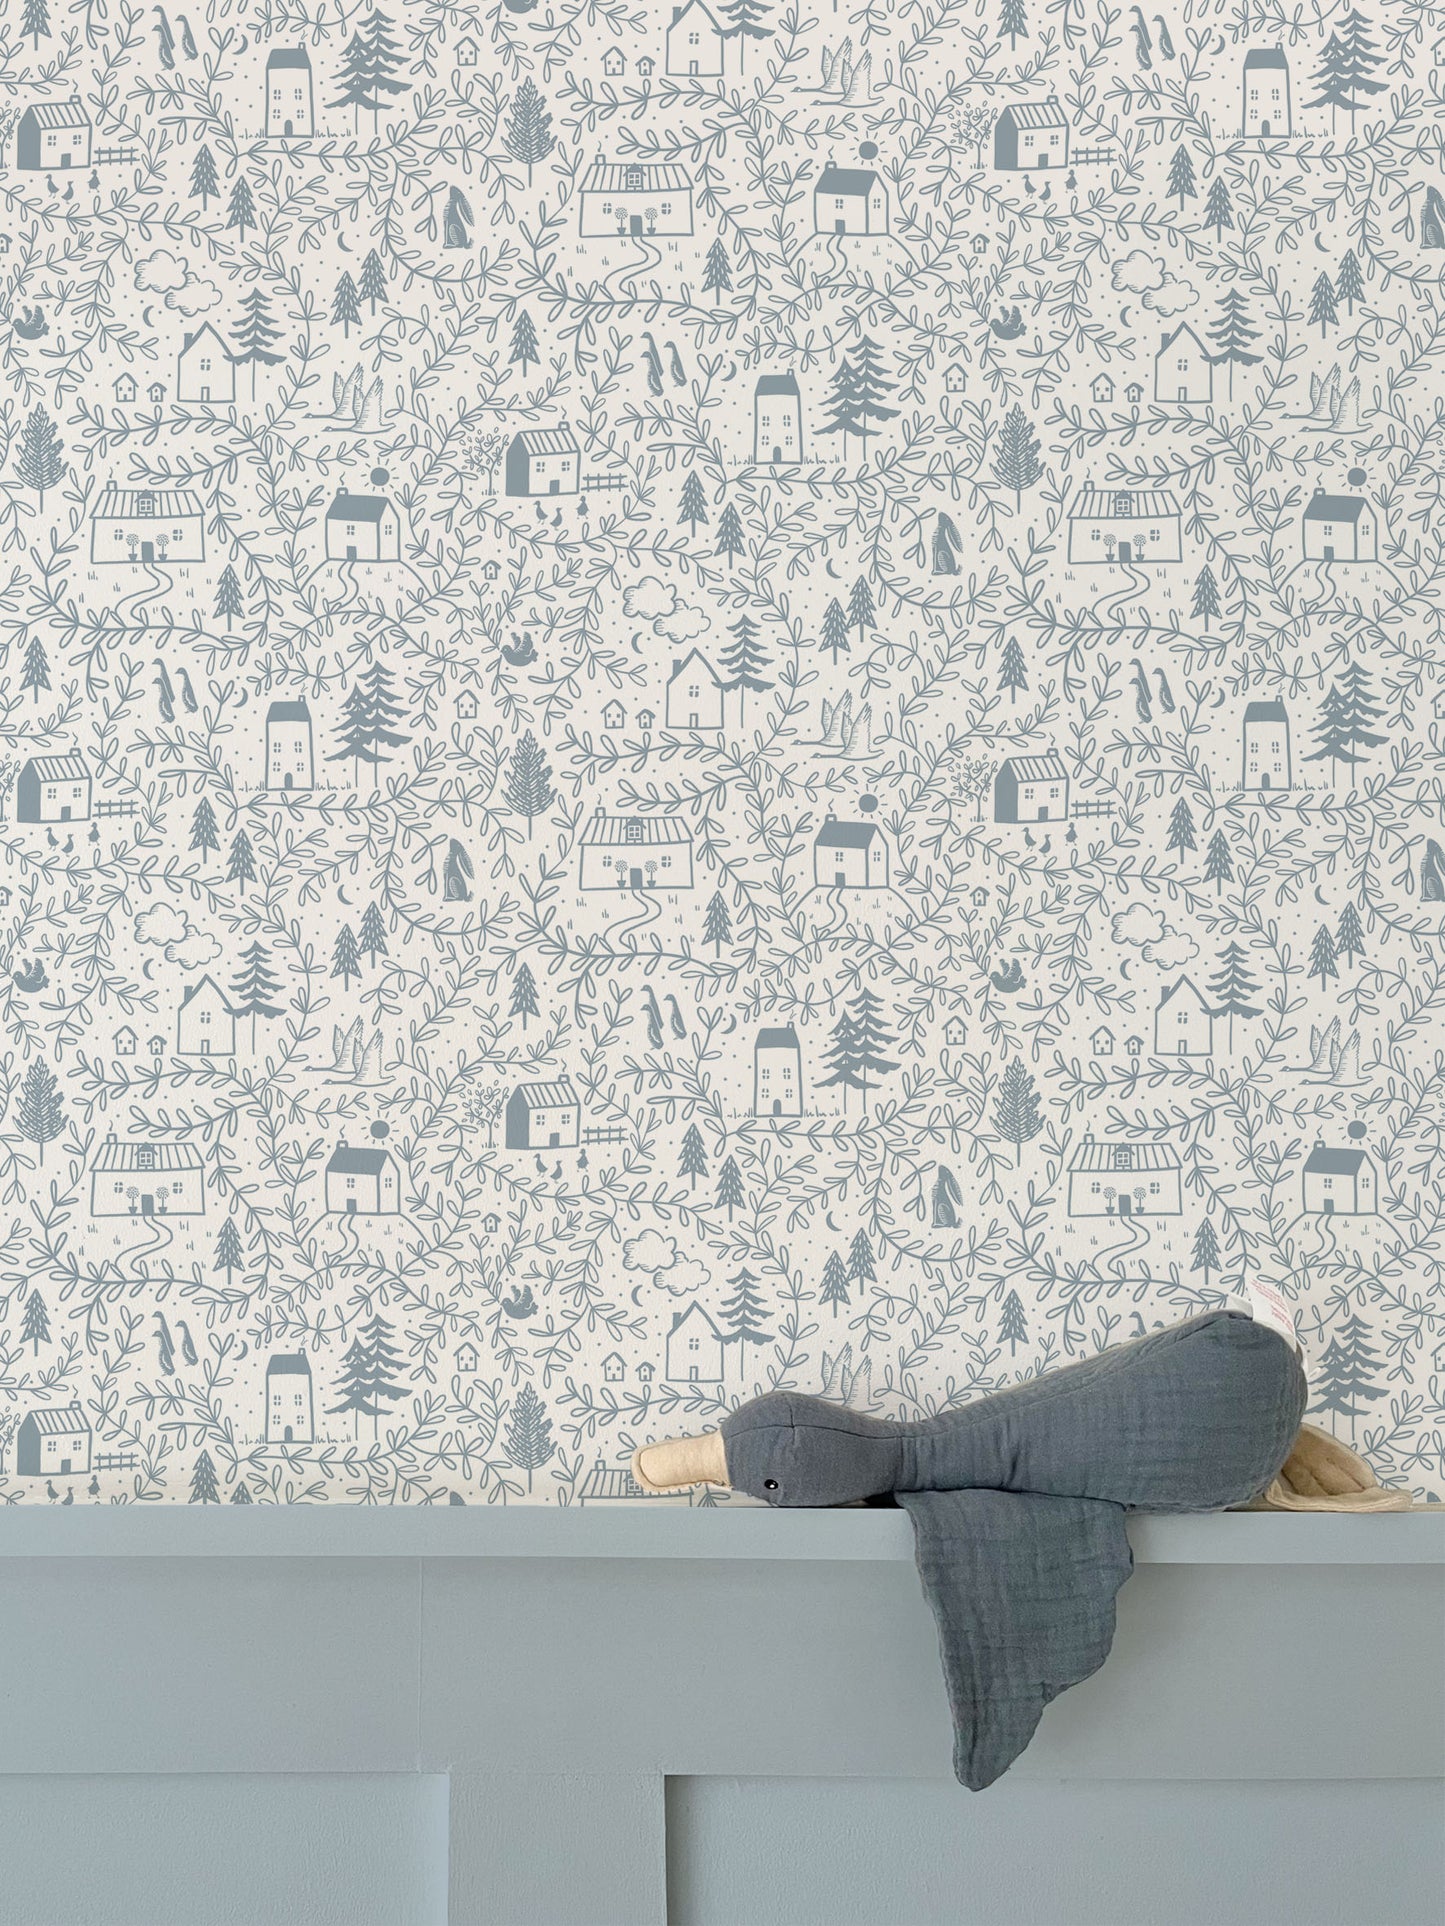 Cottages in the woods luxury children's wallpaper featured above blue wall panelling with soft toy duck